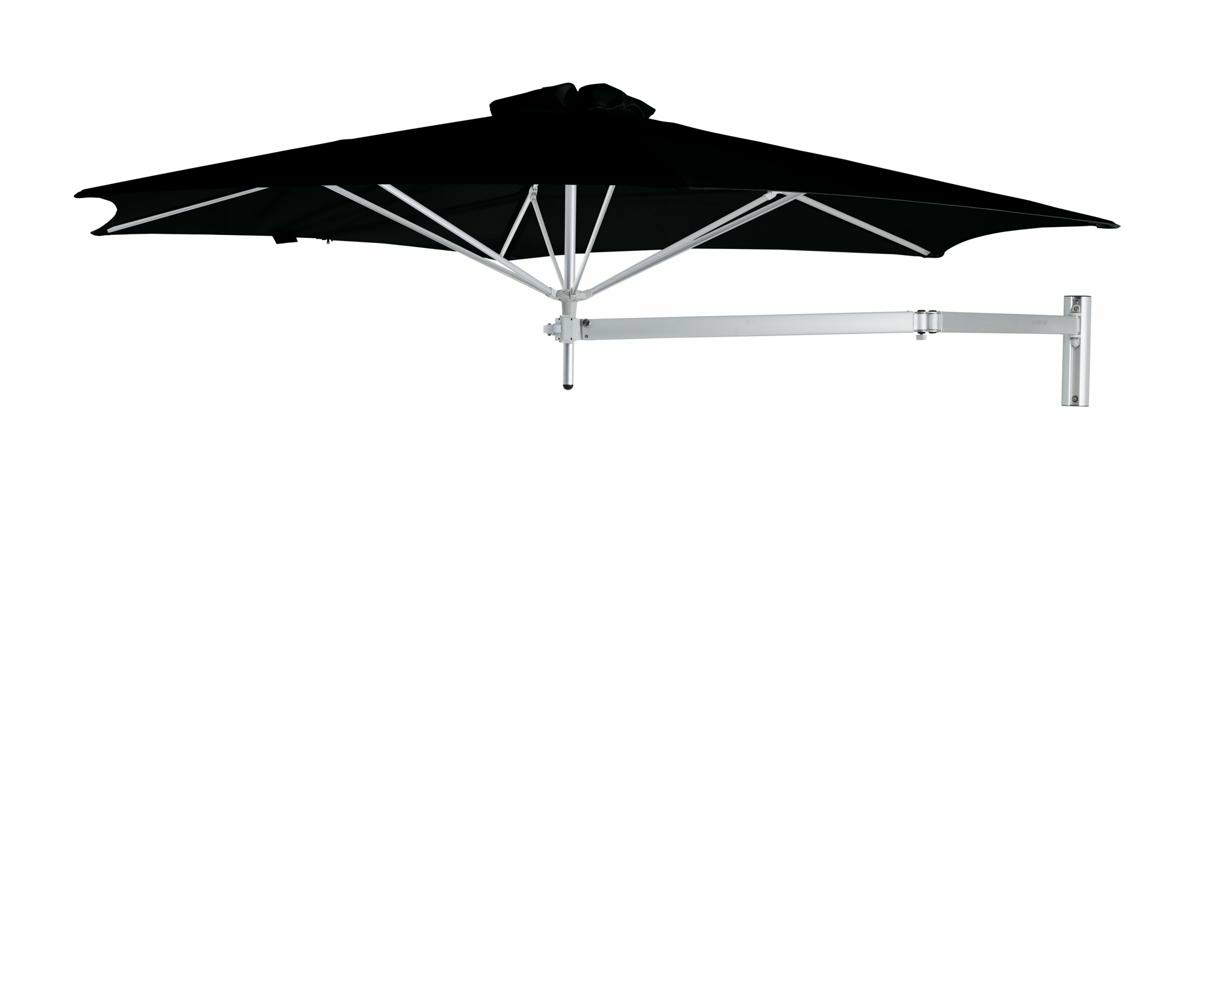 Paraflex wall mounted parasols round 3 m with Black fabric and a Neo arm